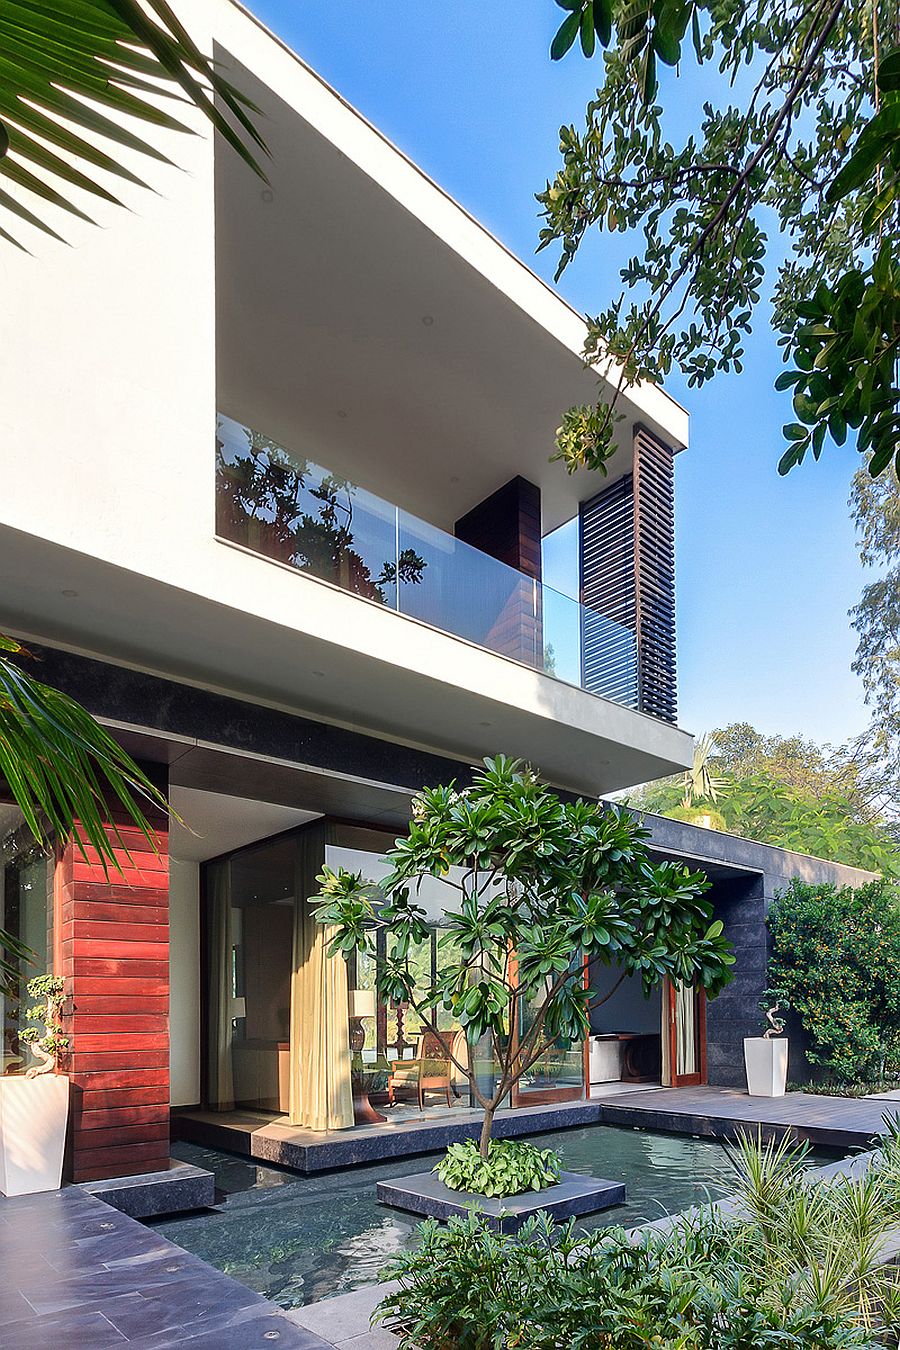 Glass walls and fabulous landscape around the house give it an open, natural look